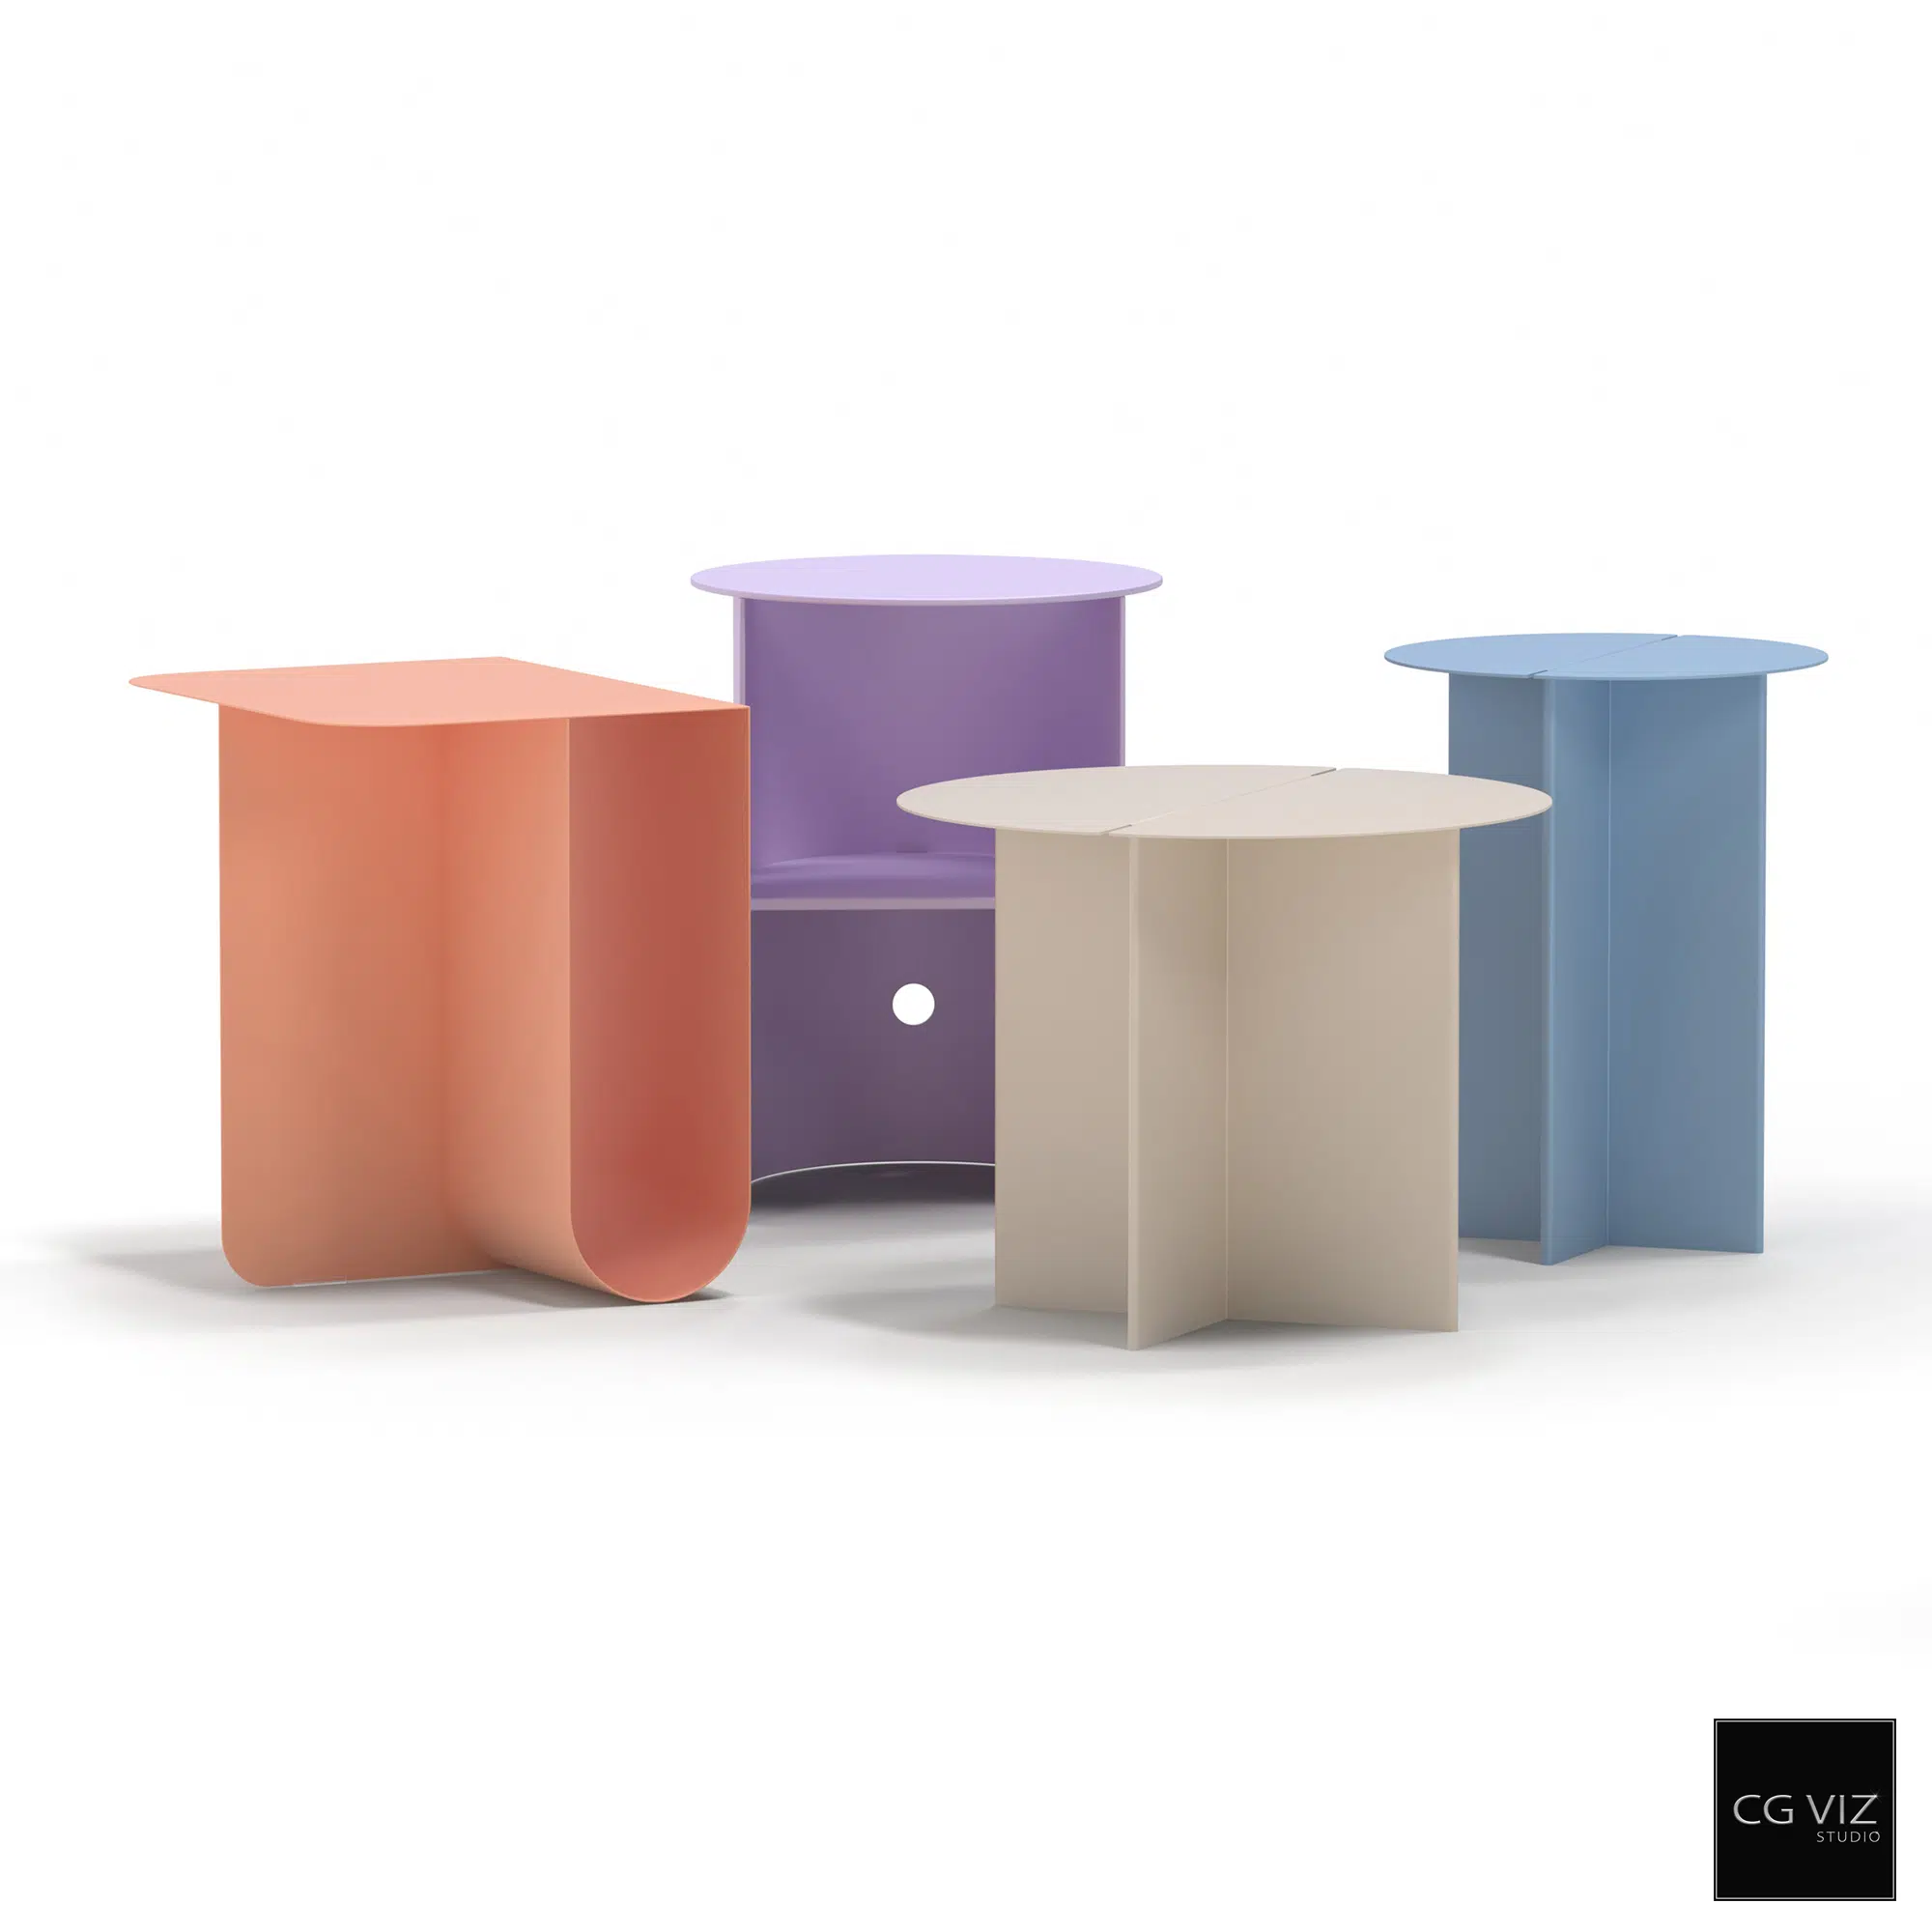 3D models of pastel-colored geometric tables from the Emma Naomi Brenda collection by CG Viz Studio.